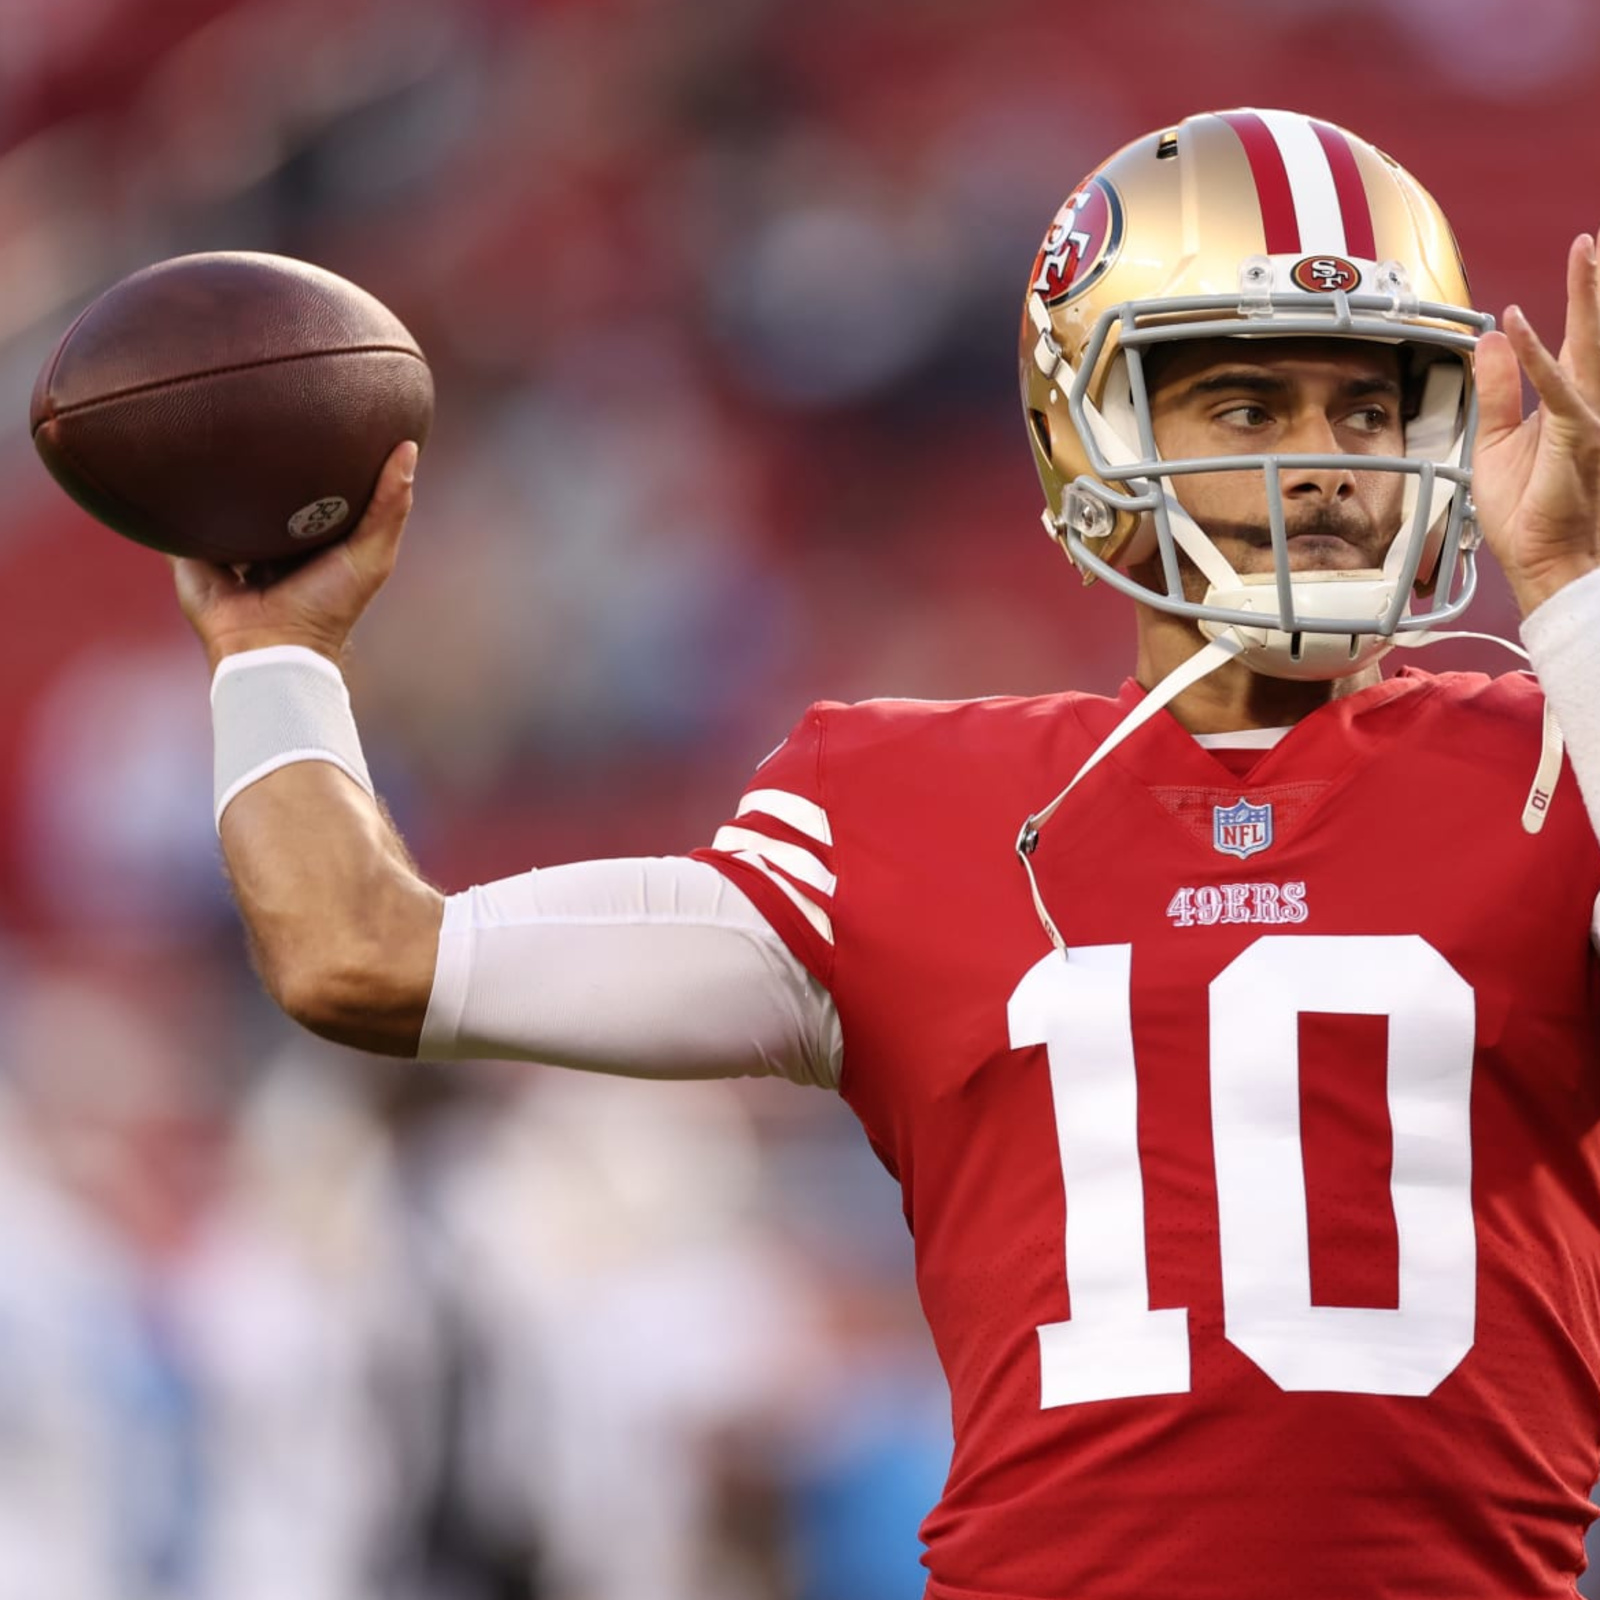 NFL on ESPN - Jimmy Garoppolo came through for the San Francisco 49ers with  the Jordan XI's 